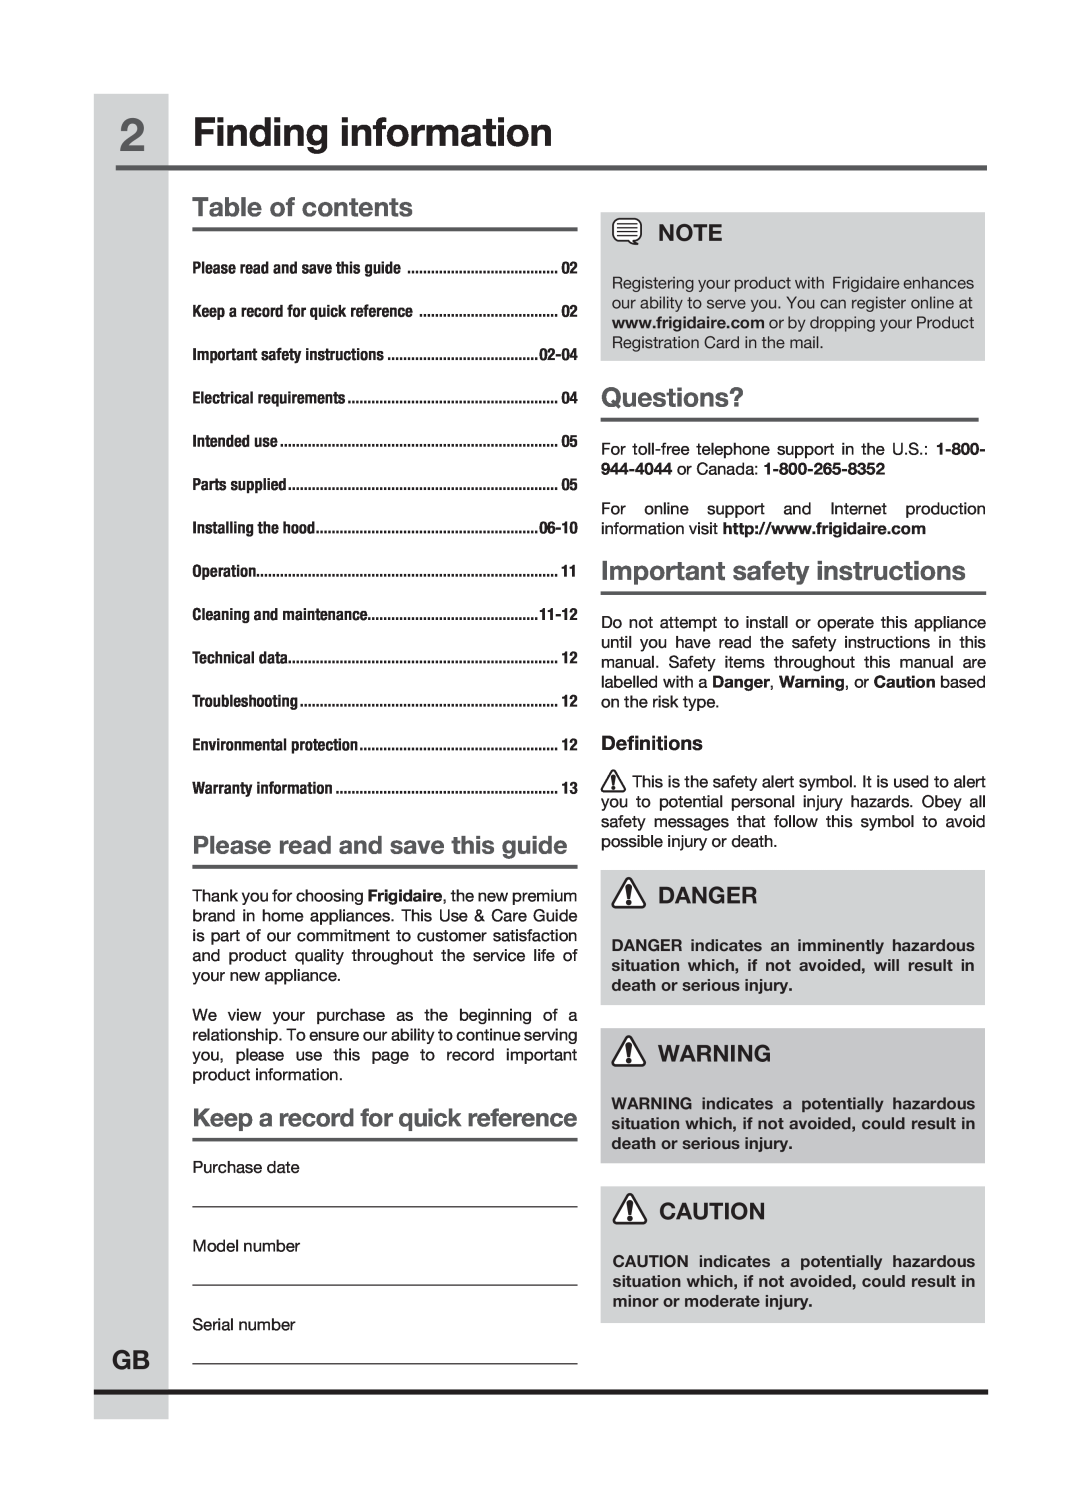 Frigidaire FHWC3060LS manual Finding information, Table of contents, Questions?, Important safety instructions, Danger 